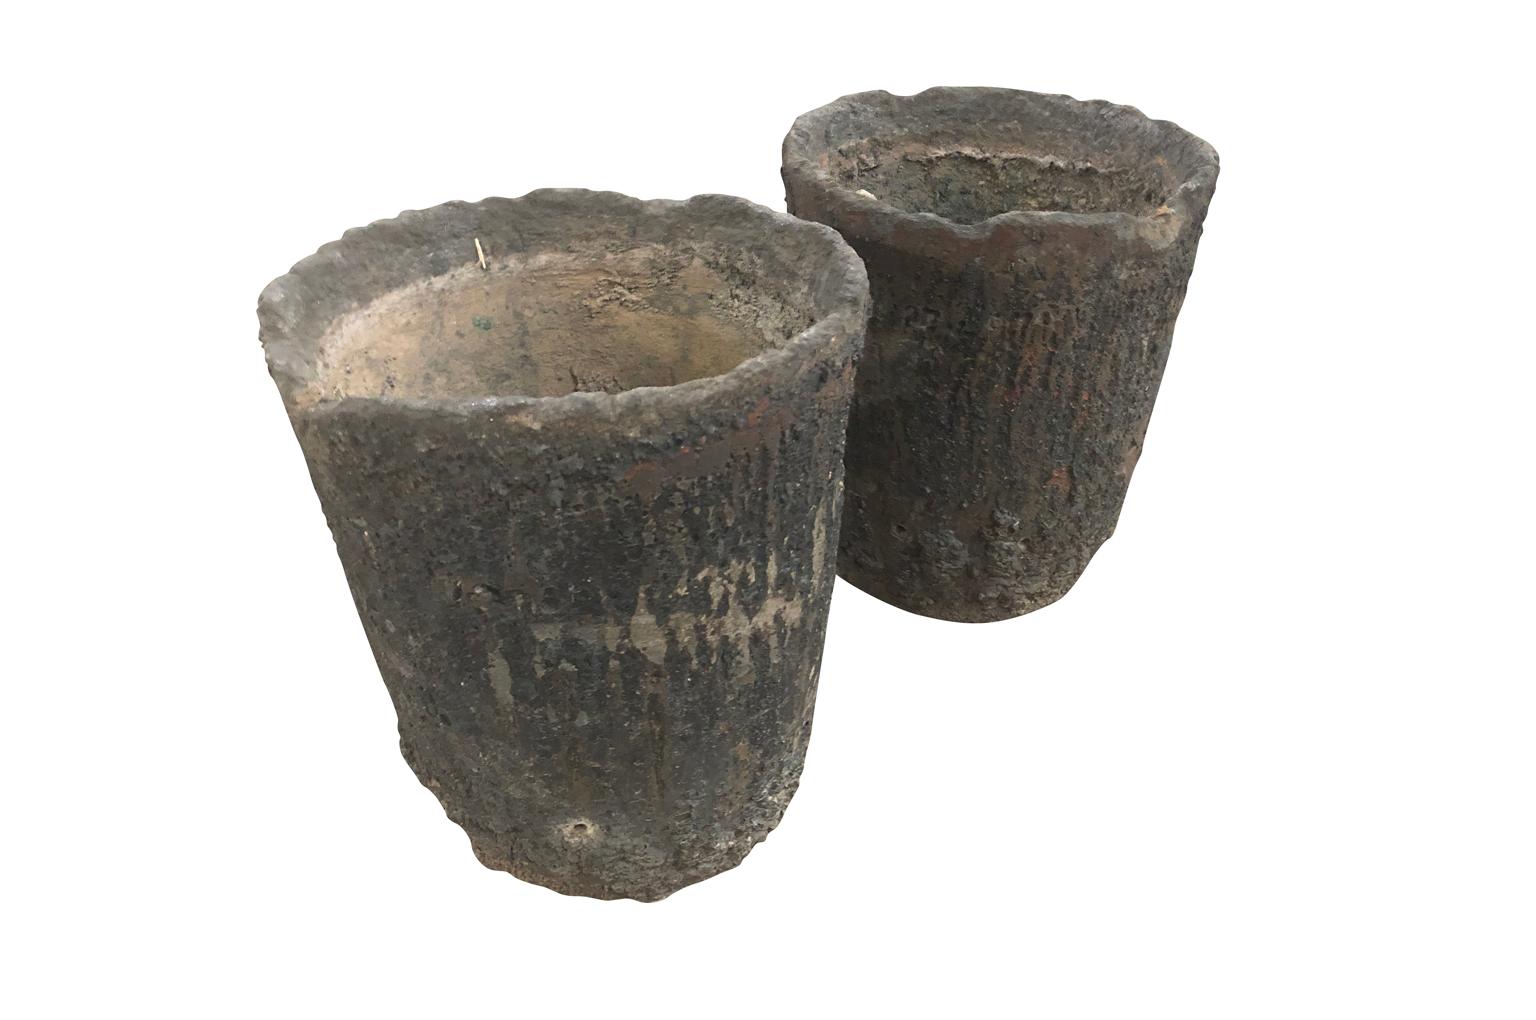 A wonderful pair of earlier 20th century French Foundry Pots, Creusets. Fabulous as jardinières or planters. Perfect for any interior or garden. A crucible was made from a material with a much higher melting point than what was going to be melted in